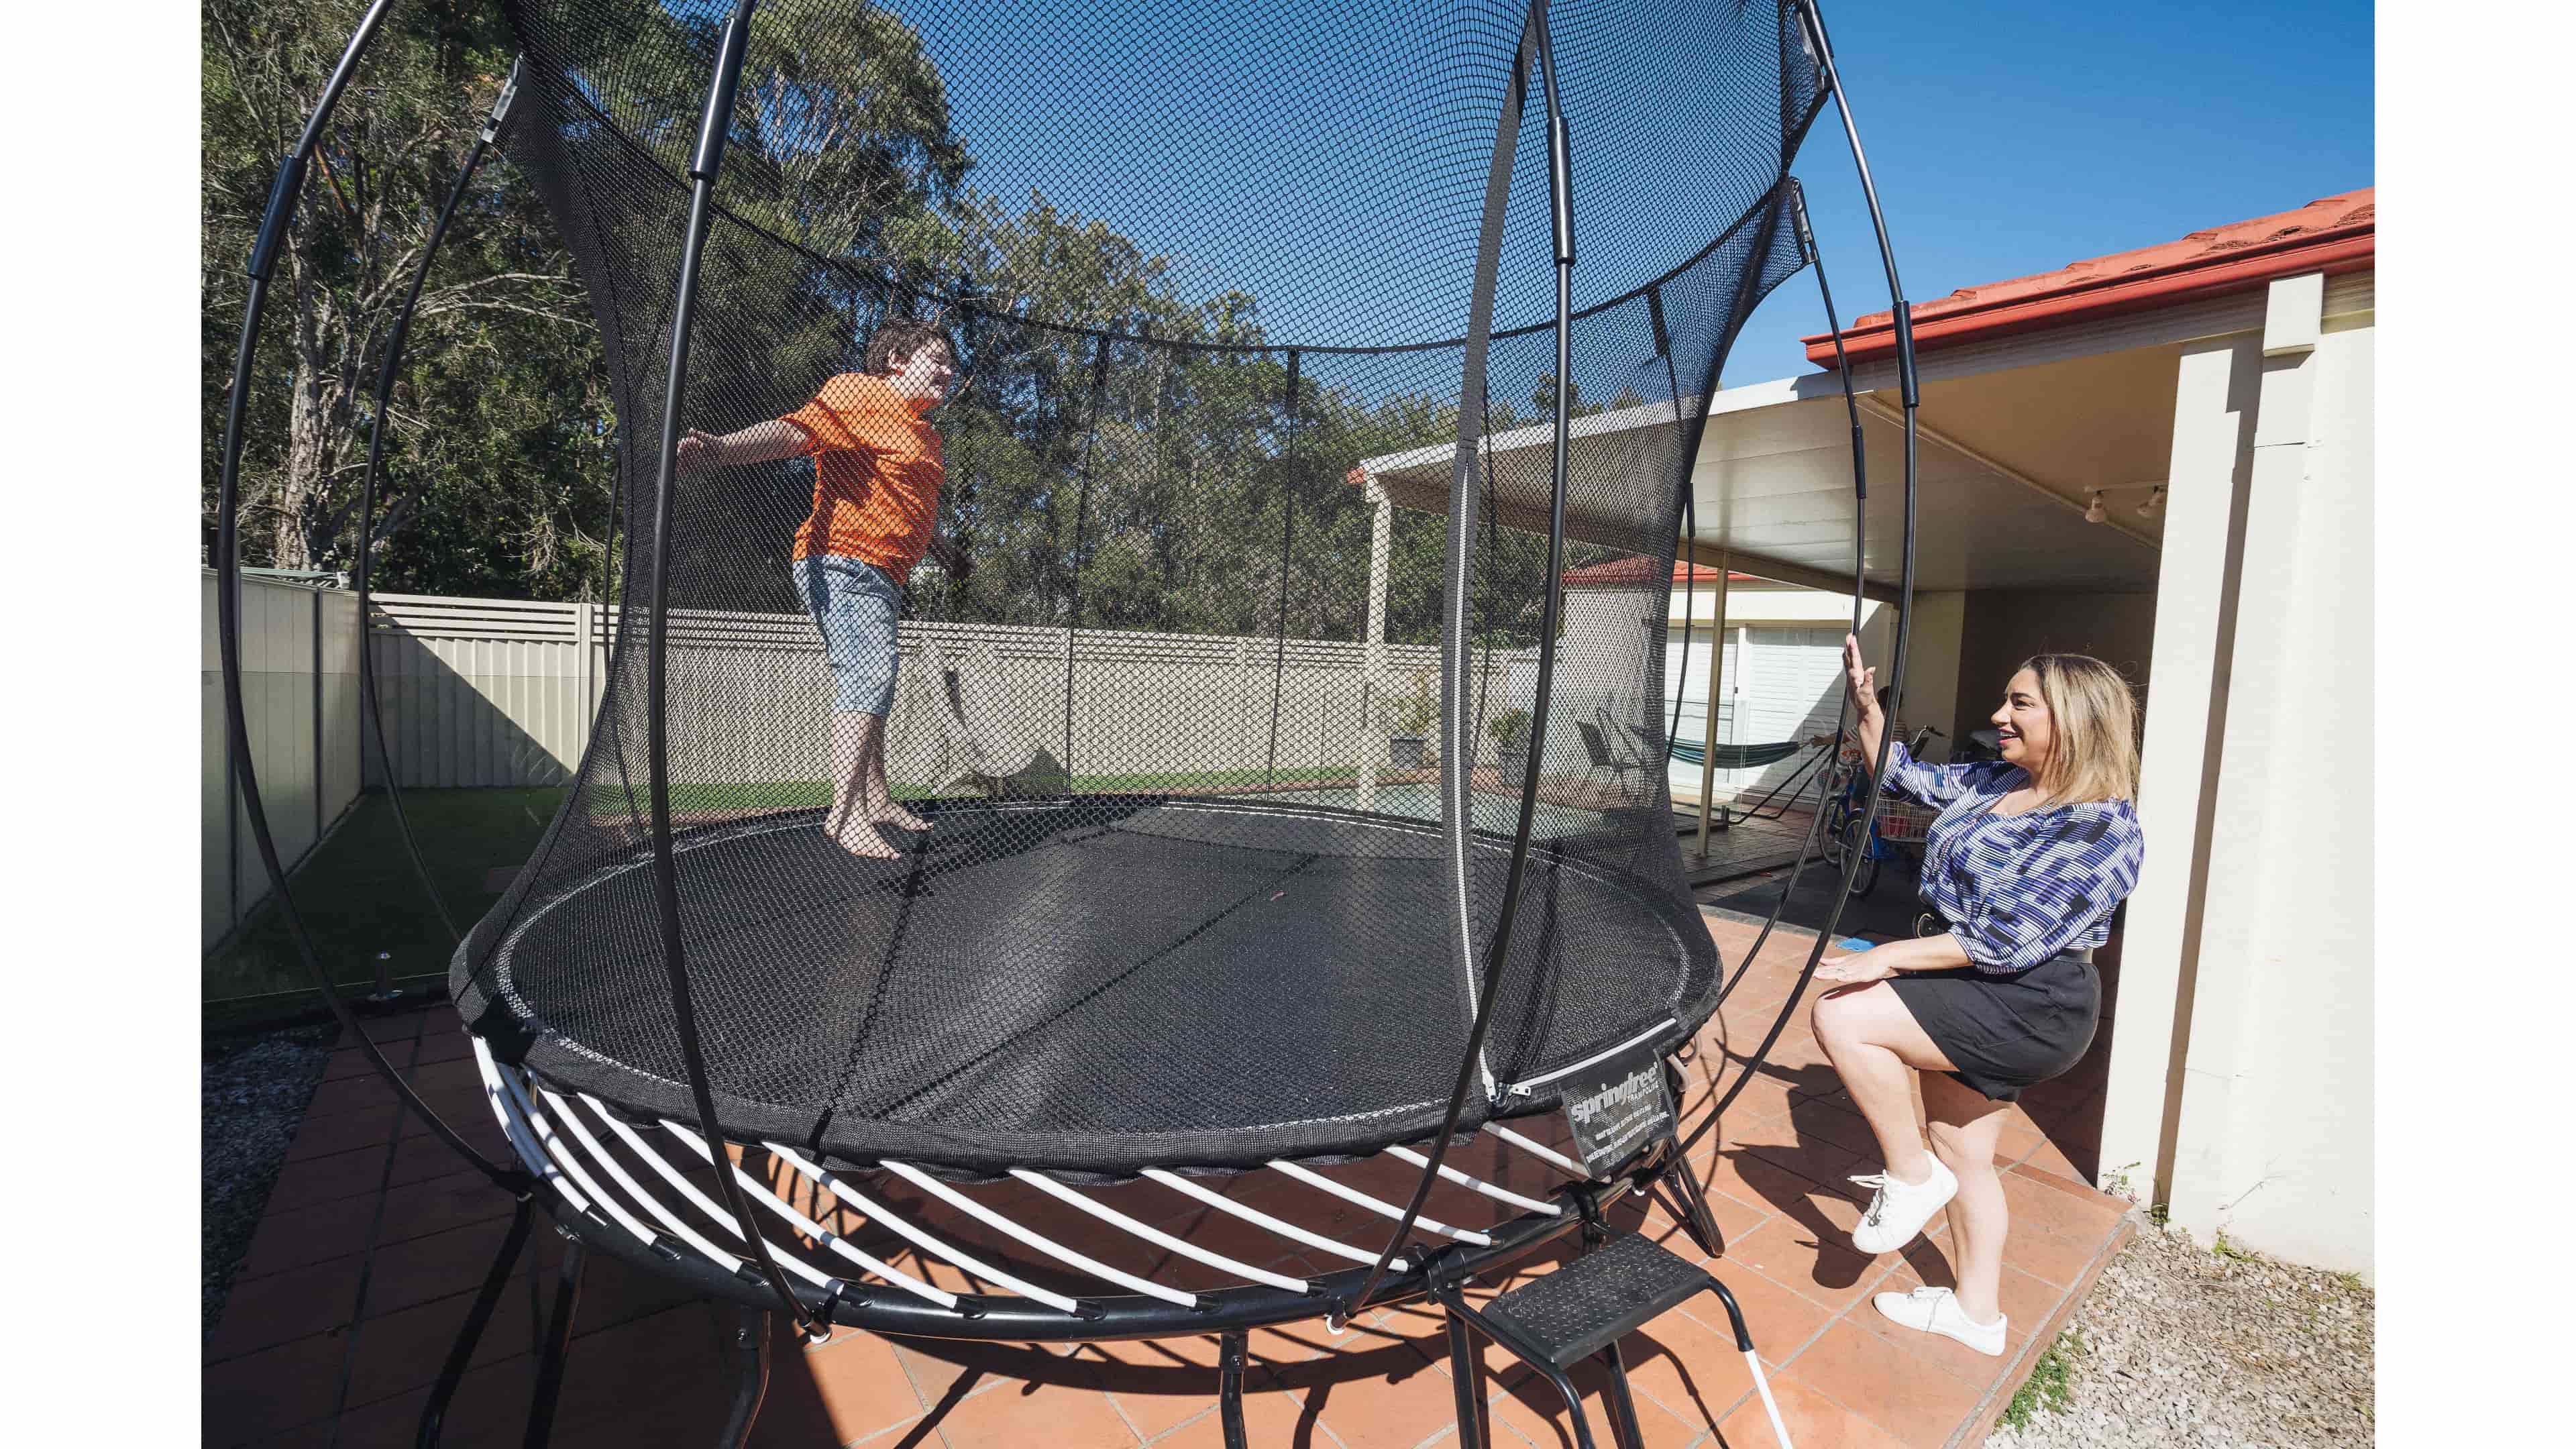 Is Trampoline Therapy for Autism Spectrum Right for You or Your Loved One?